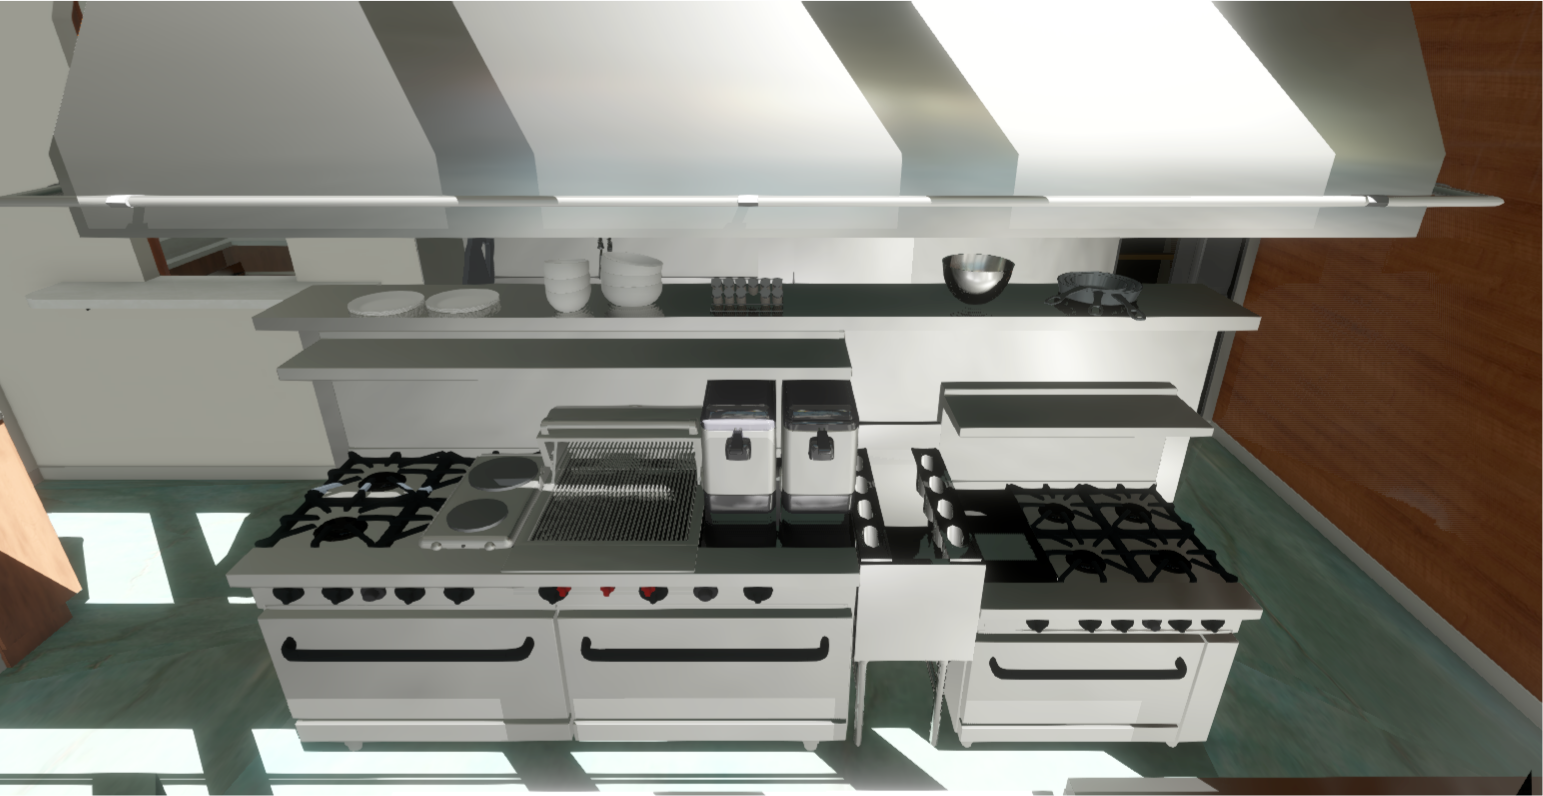 An animated render of the stainless steel frying and stove top cooking area in the new Soul de Cuba restaurant with modern touches and luxury finishes, designed by Creative Touch Interiors.